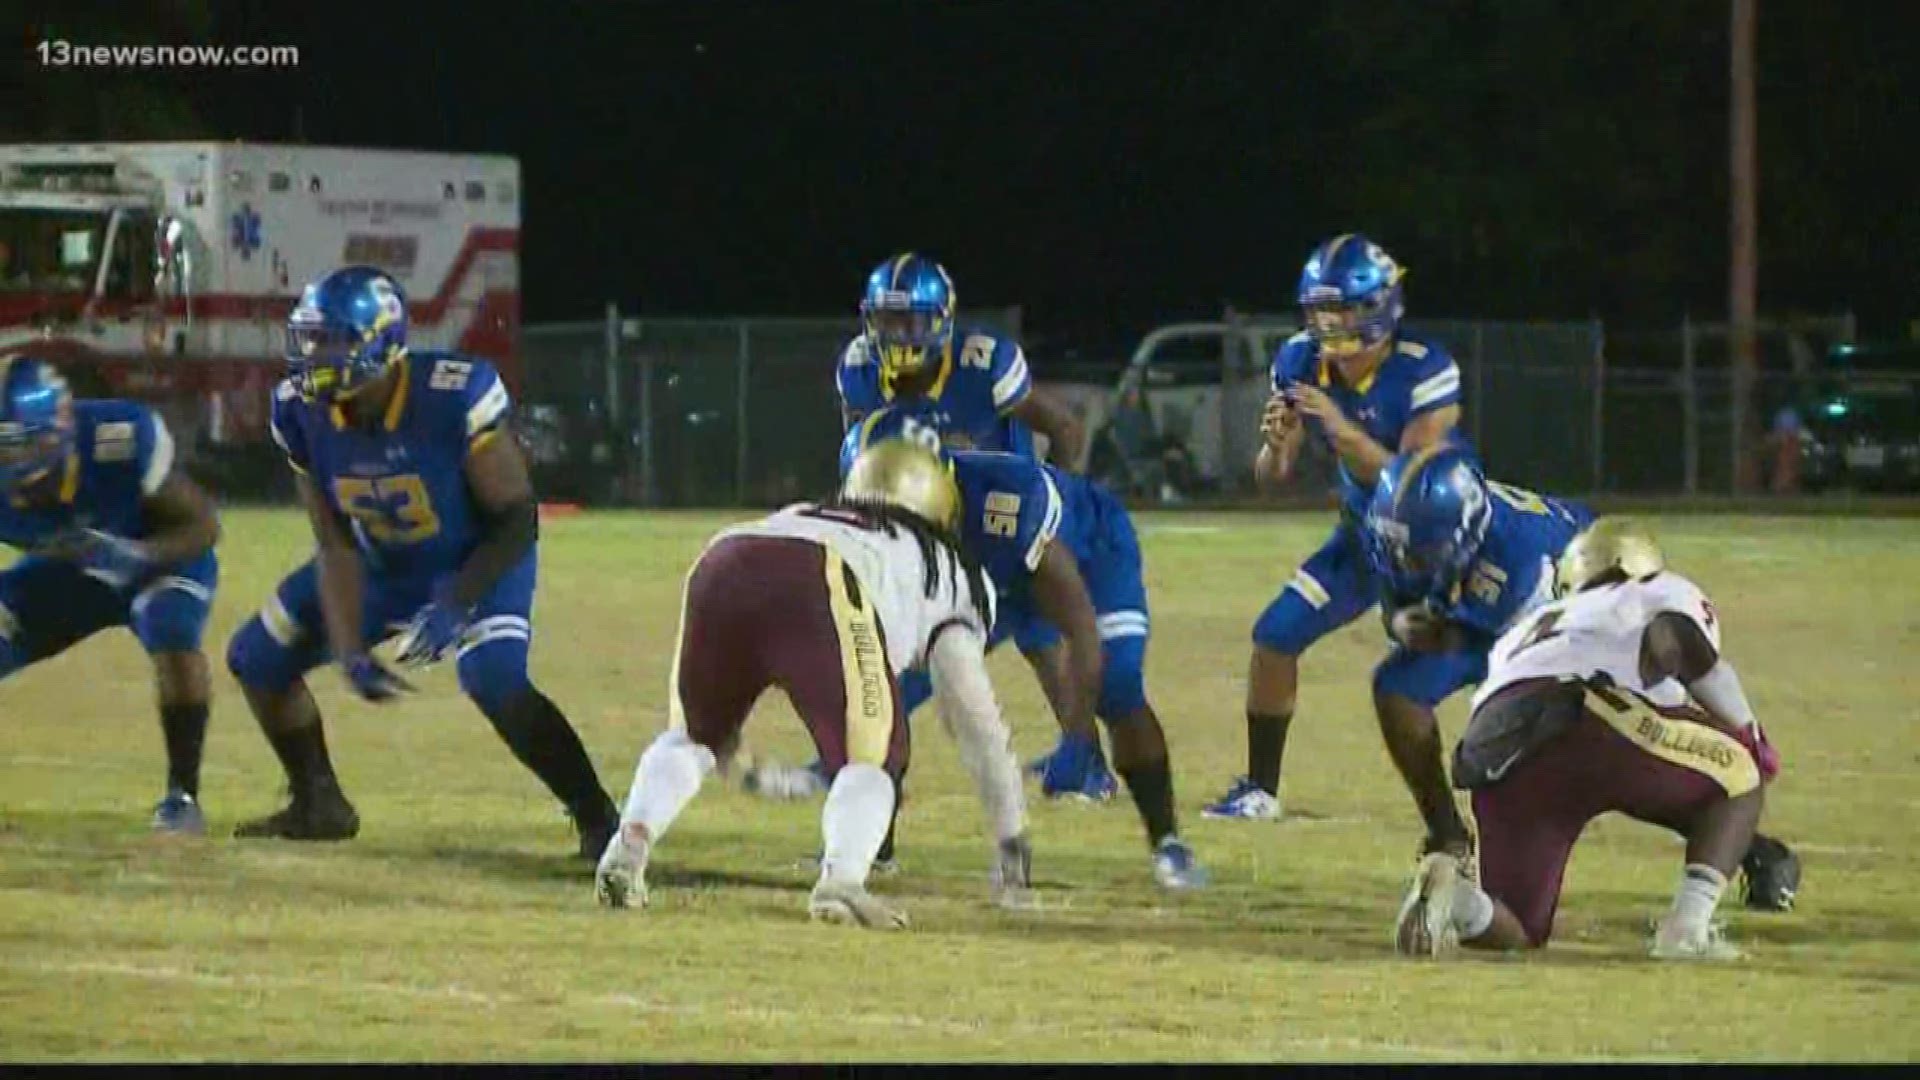 The last week of the regular season for area high school football saw Oscar Smith get its revenge against King's Fork as they rolled past the Bulldogs 49-10.